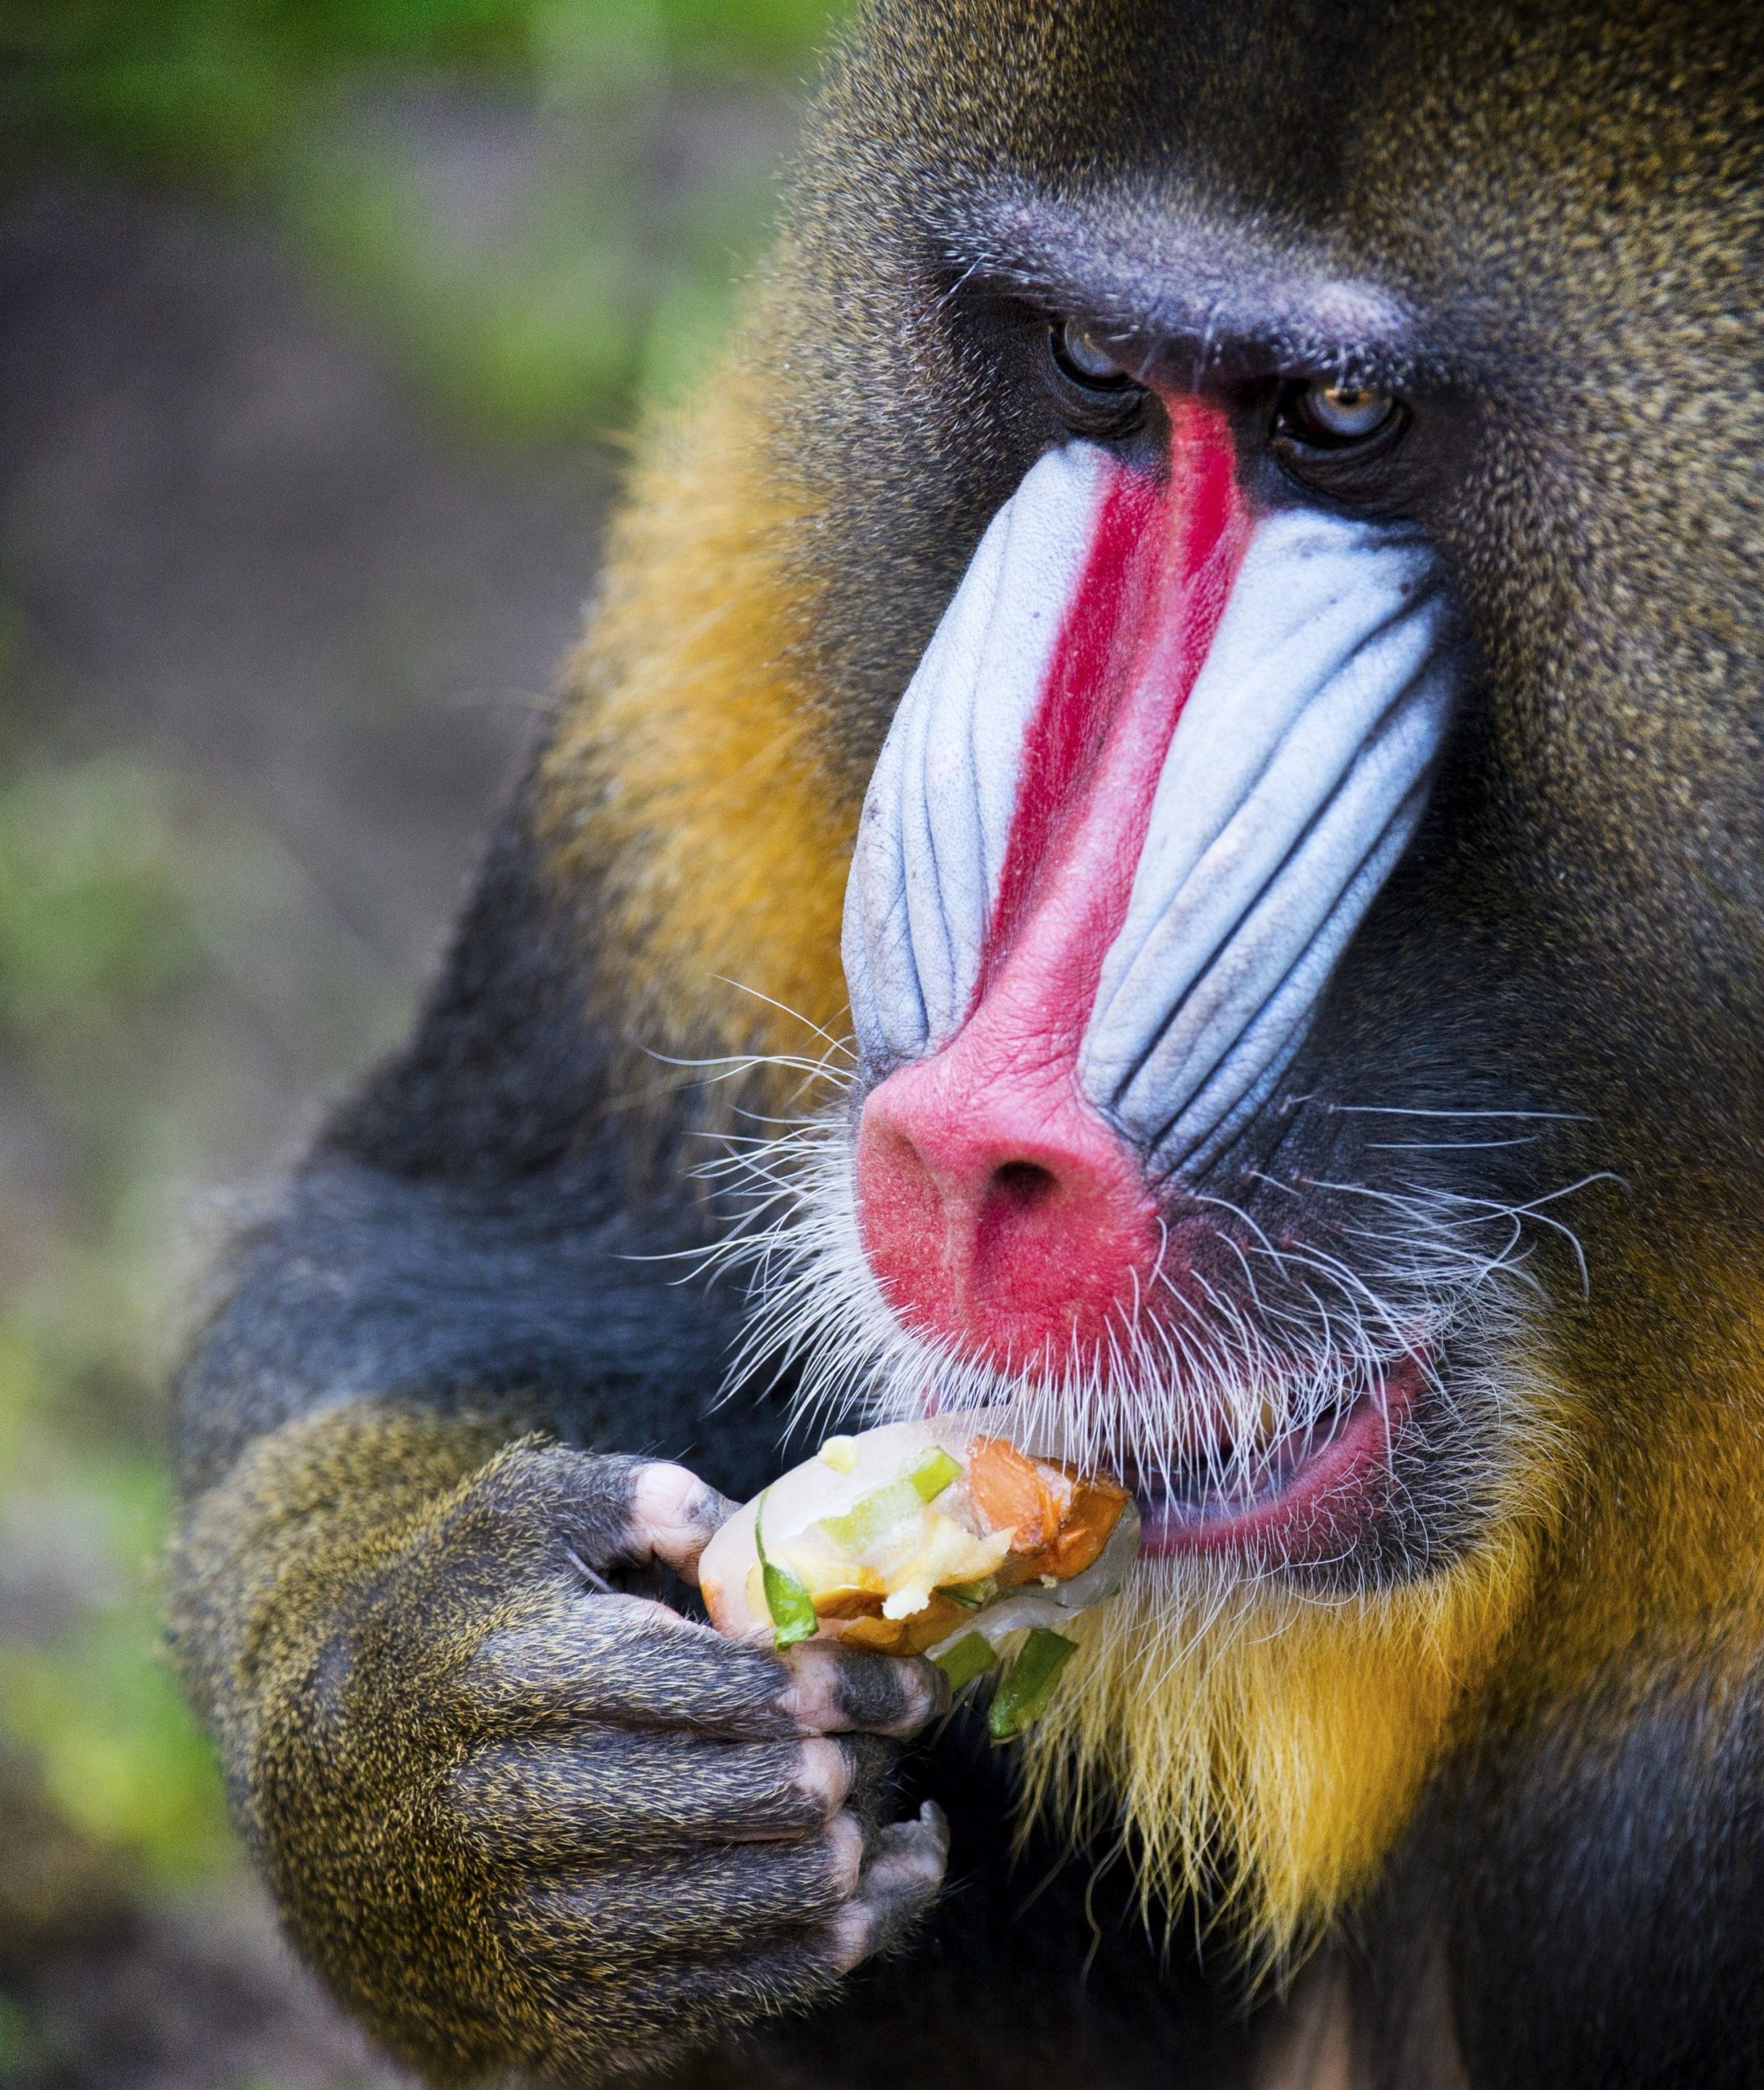 A mandrill licks a fruit ice cream in Ouwehands Dierenpark (Ouwehands Zoo) in Rhenen, on June 30, 2015. (Photo: Piroschka van de Wouw/AFP, Getty Images)